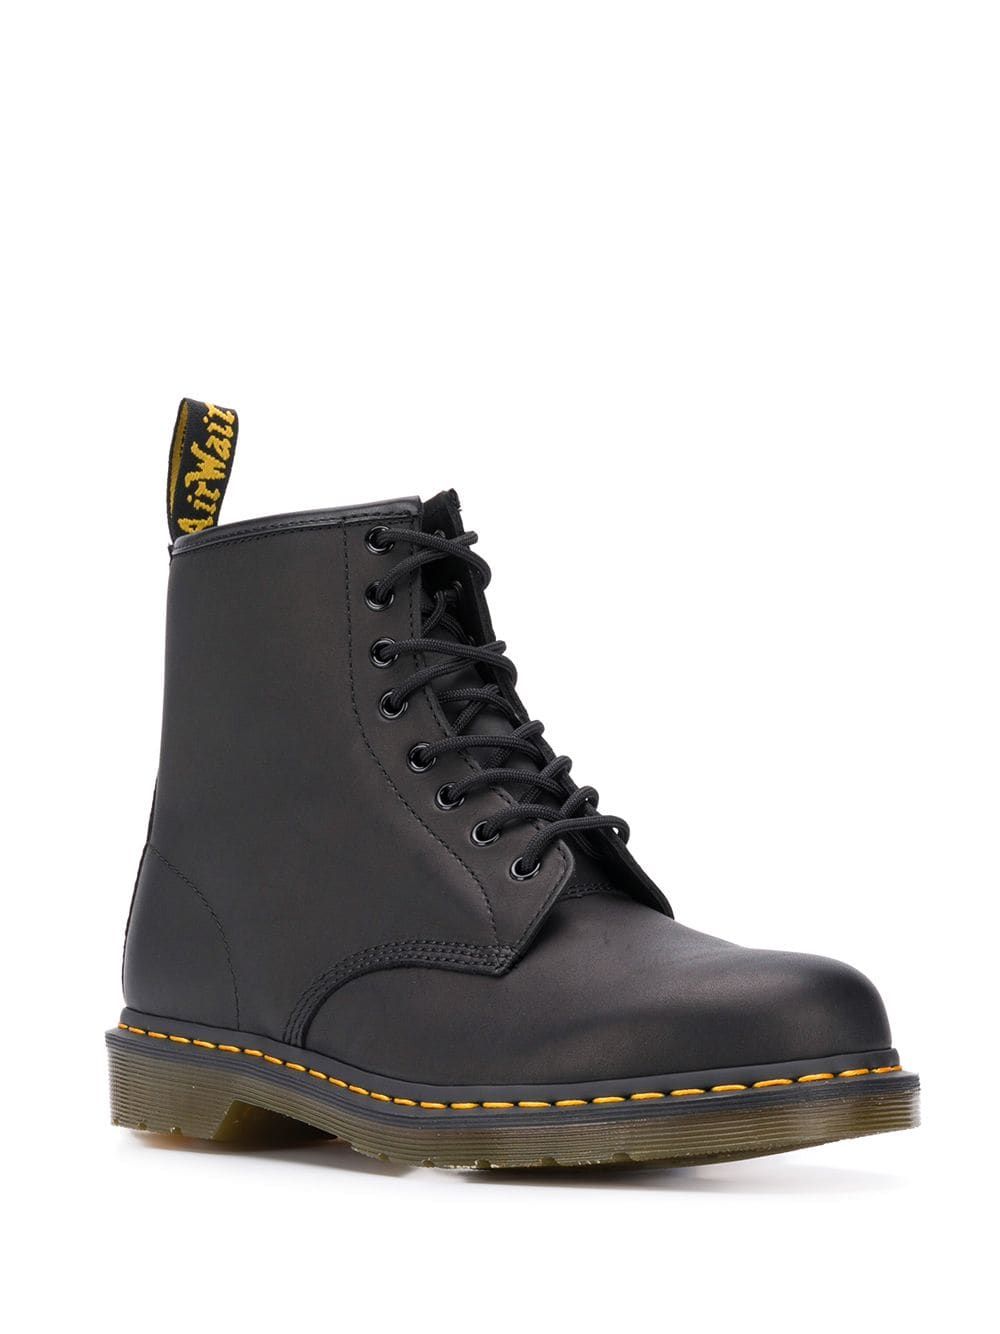 dr martens vs timberland for winter